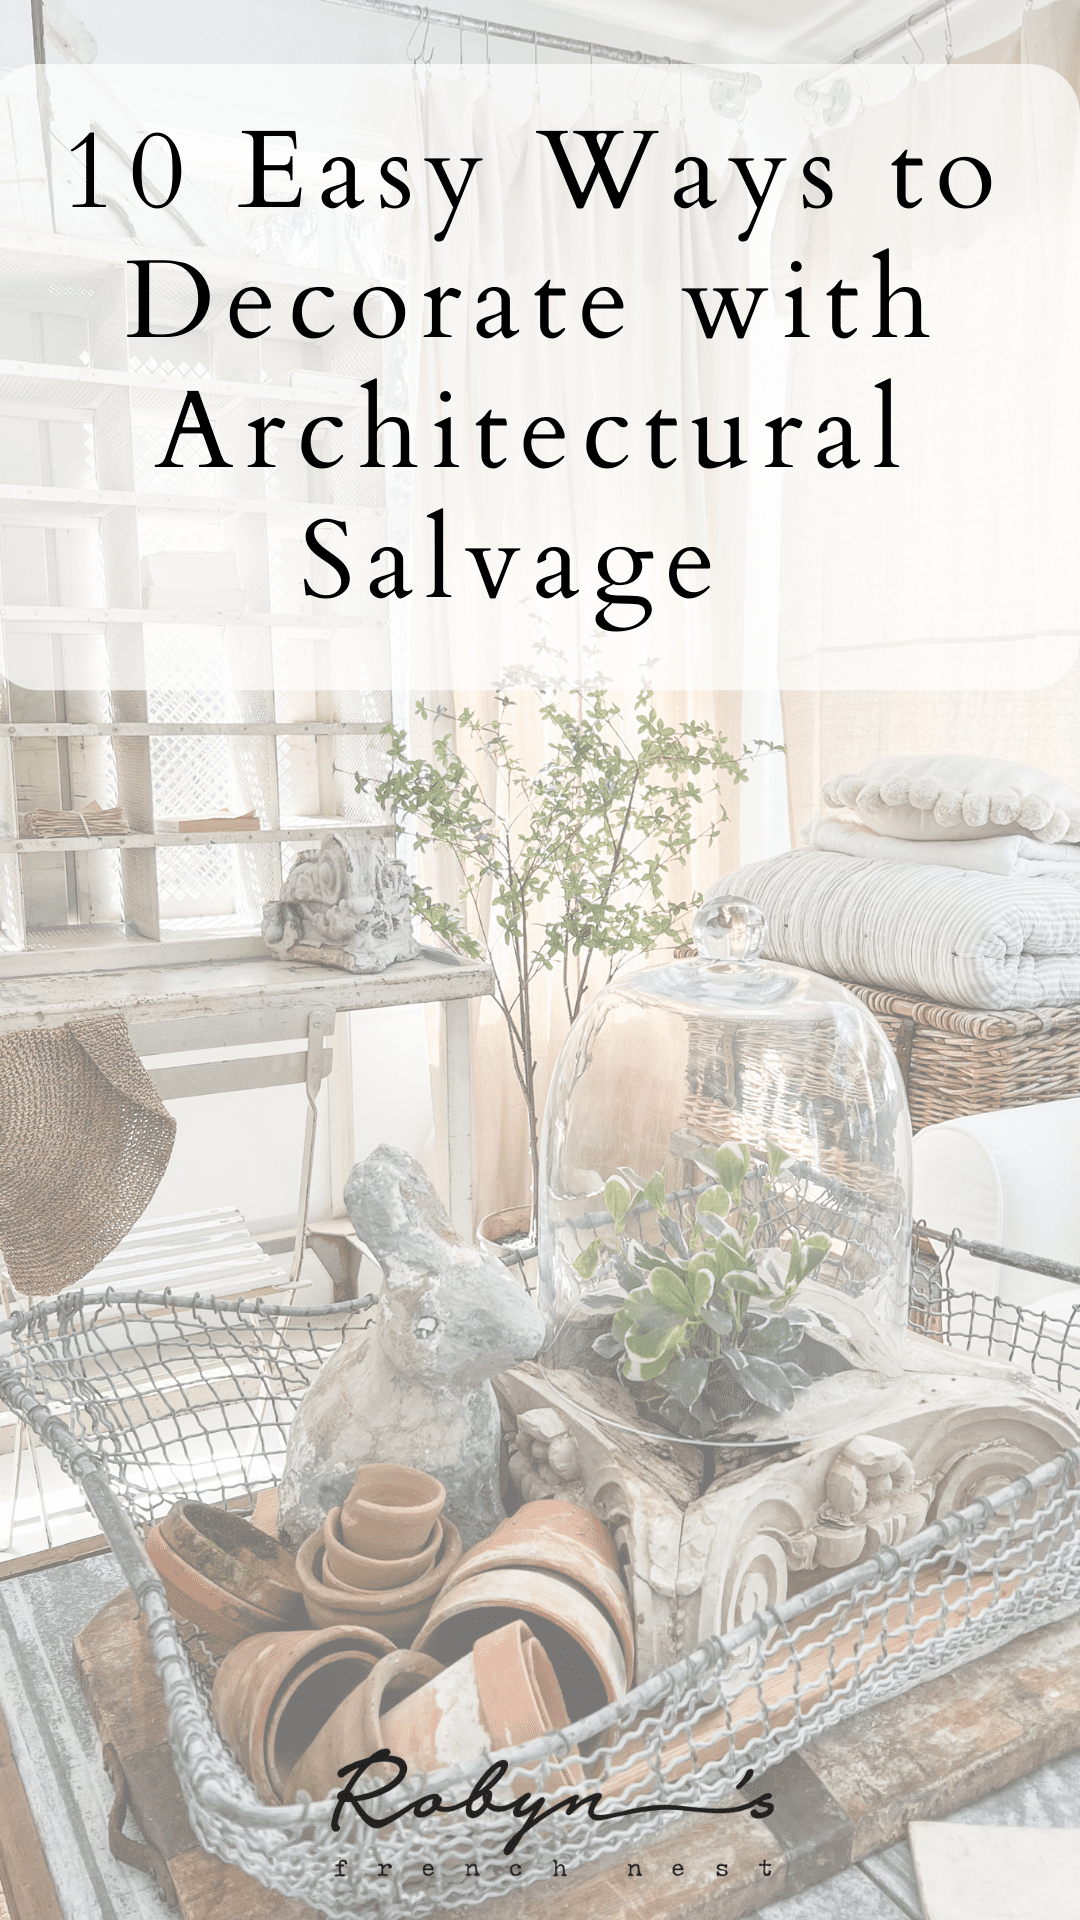 How to Decorate with Vintage Architectural Salvage: 10 Easy Ways